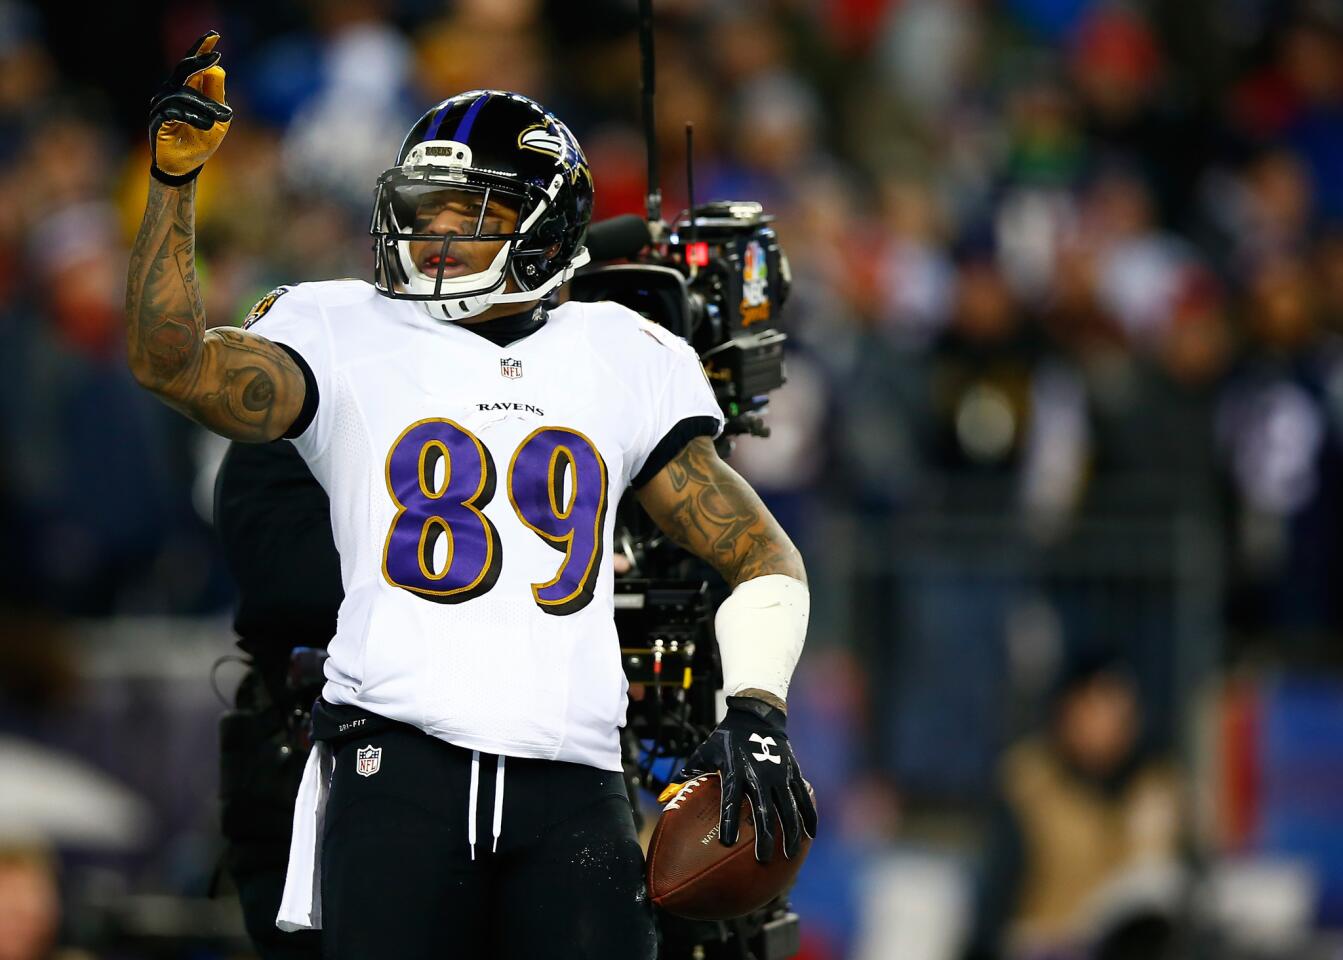 Ravens receiver Steve Smith celebrates after scoring a touchdown in the first quarter against the New England Patriots during the 2014 AFC divisional playoffs at Gillette Stadium.